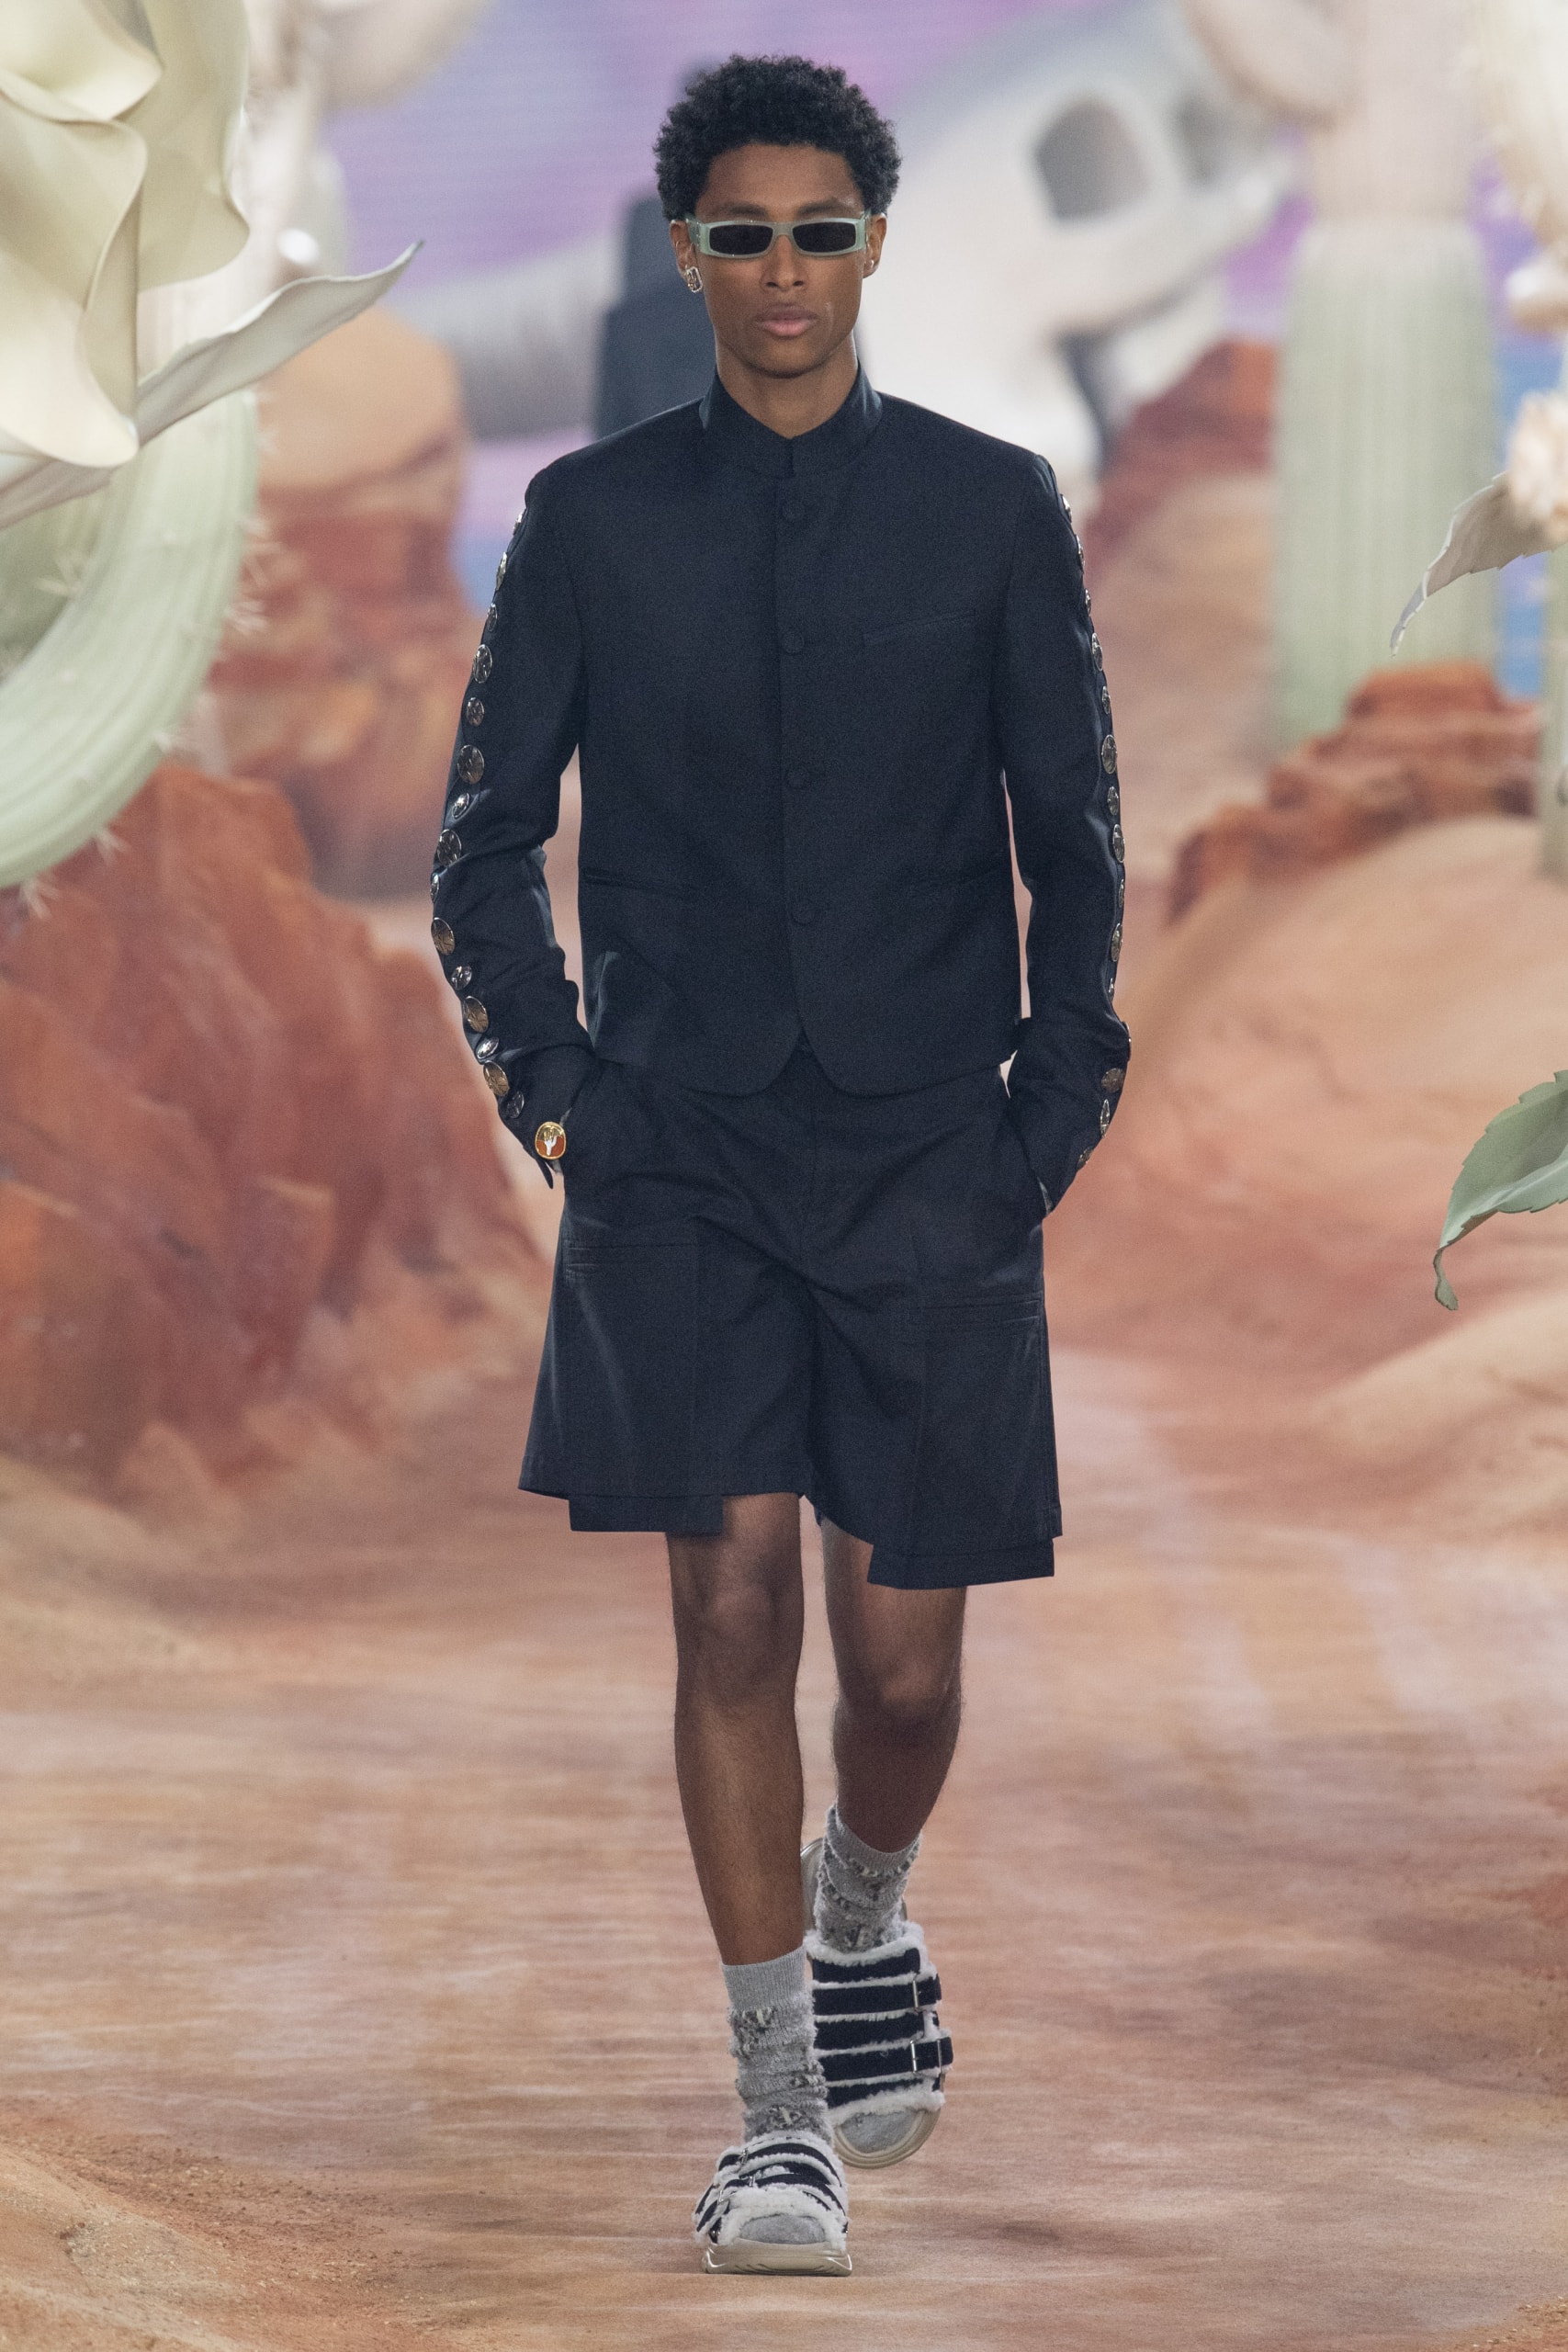 Kim Jones picks the best looks from his Cactus Jack Dior collection with  Travis Scott